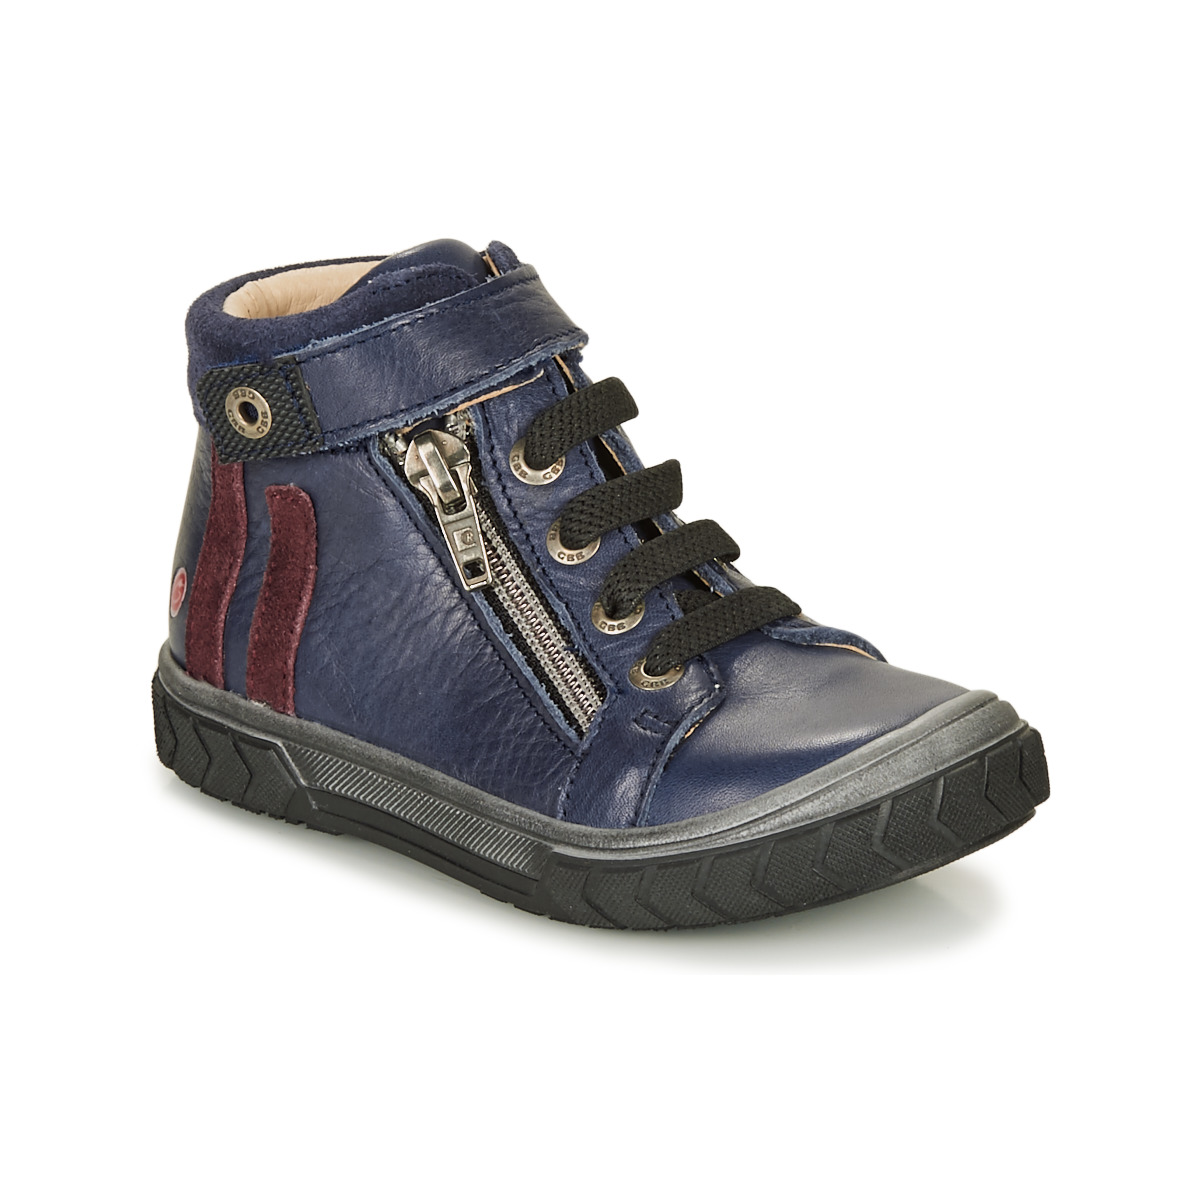 Shoes Boy Hi top trainers GBB OMAHO Blue